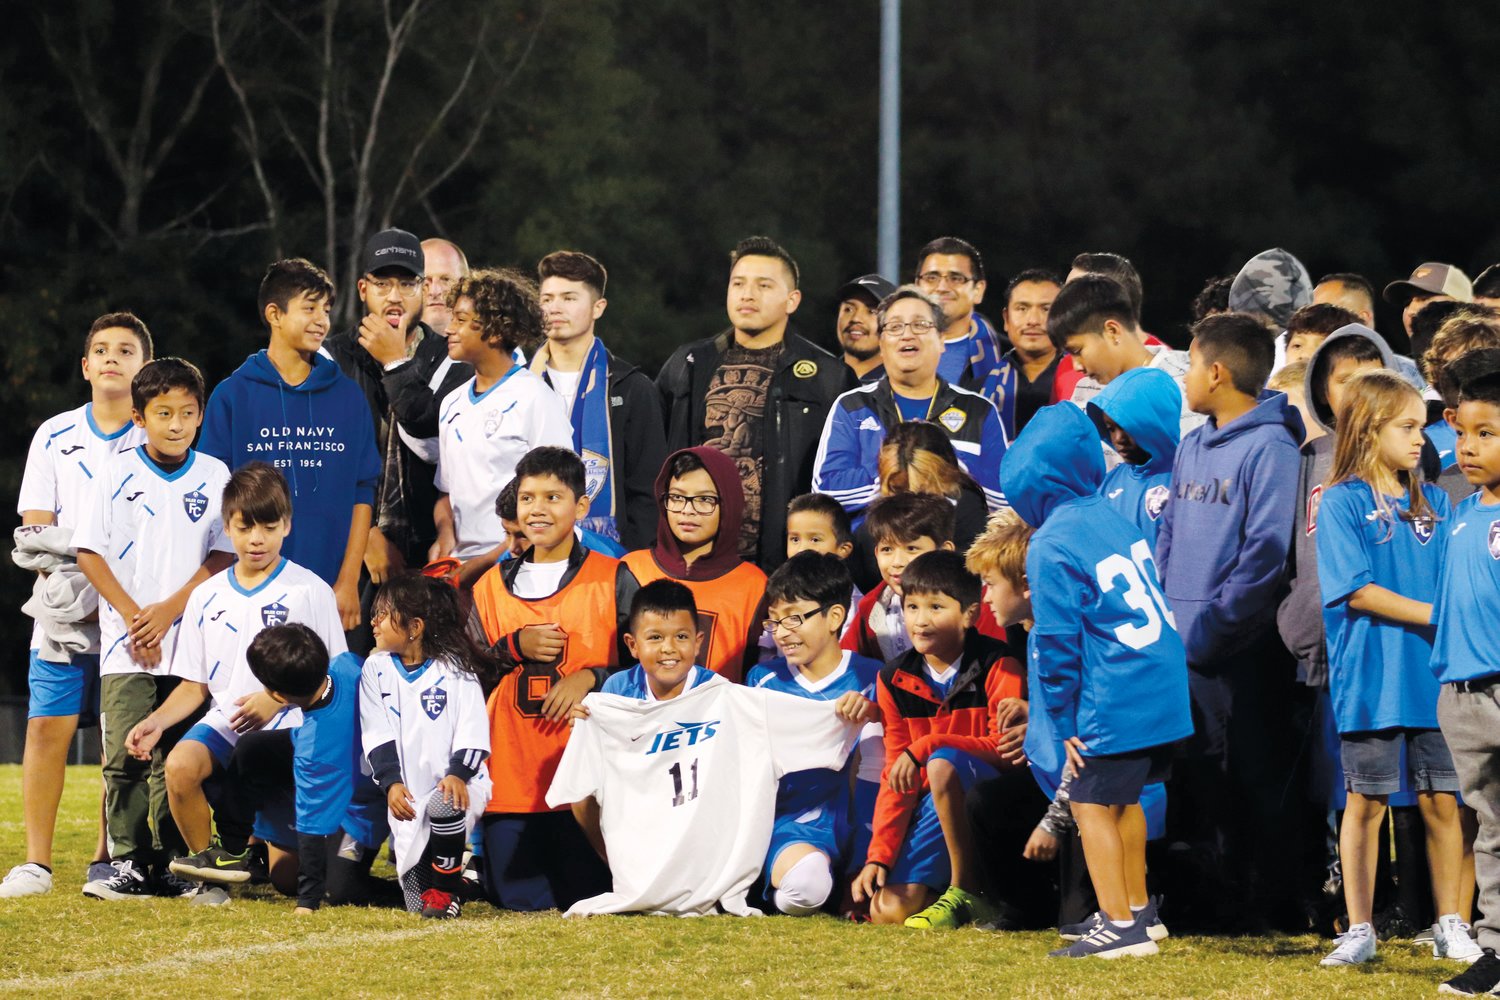 Players from Siler City Futbol Club gather around former Jordan-Matthews players at midfield during the ceremony honoring the 20th anniversary of Los Jets' creation at halftime of the Jets' 6-0 win over Cummings last Monday.